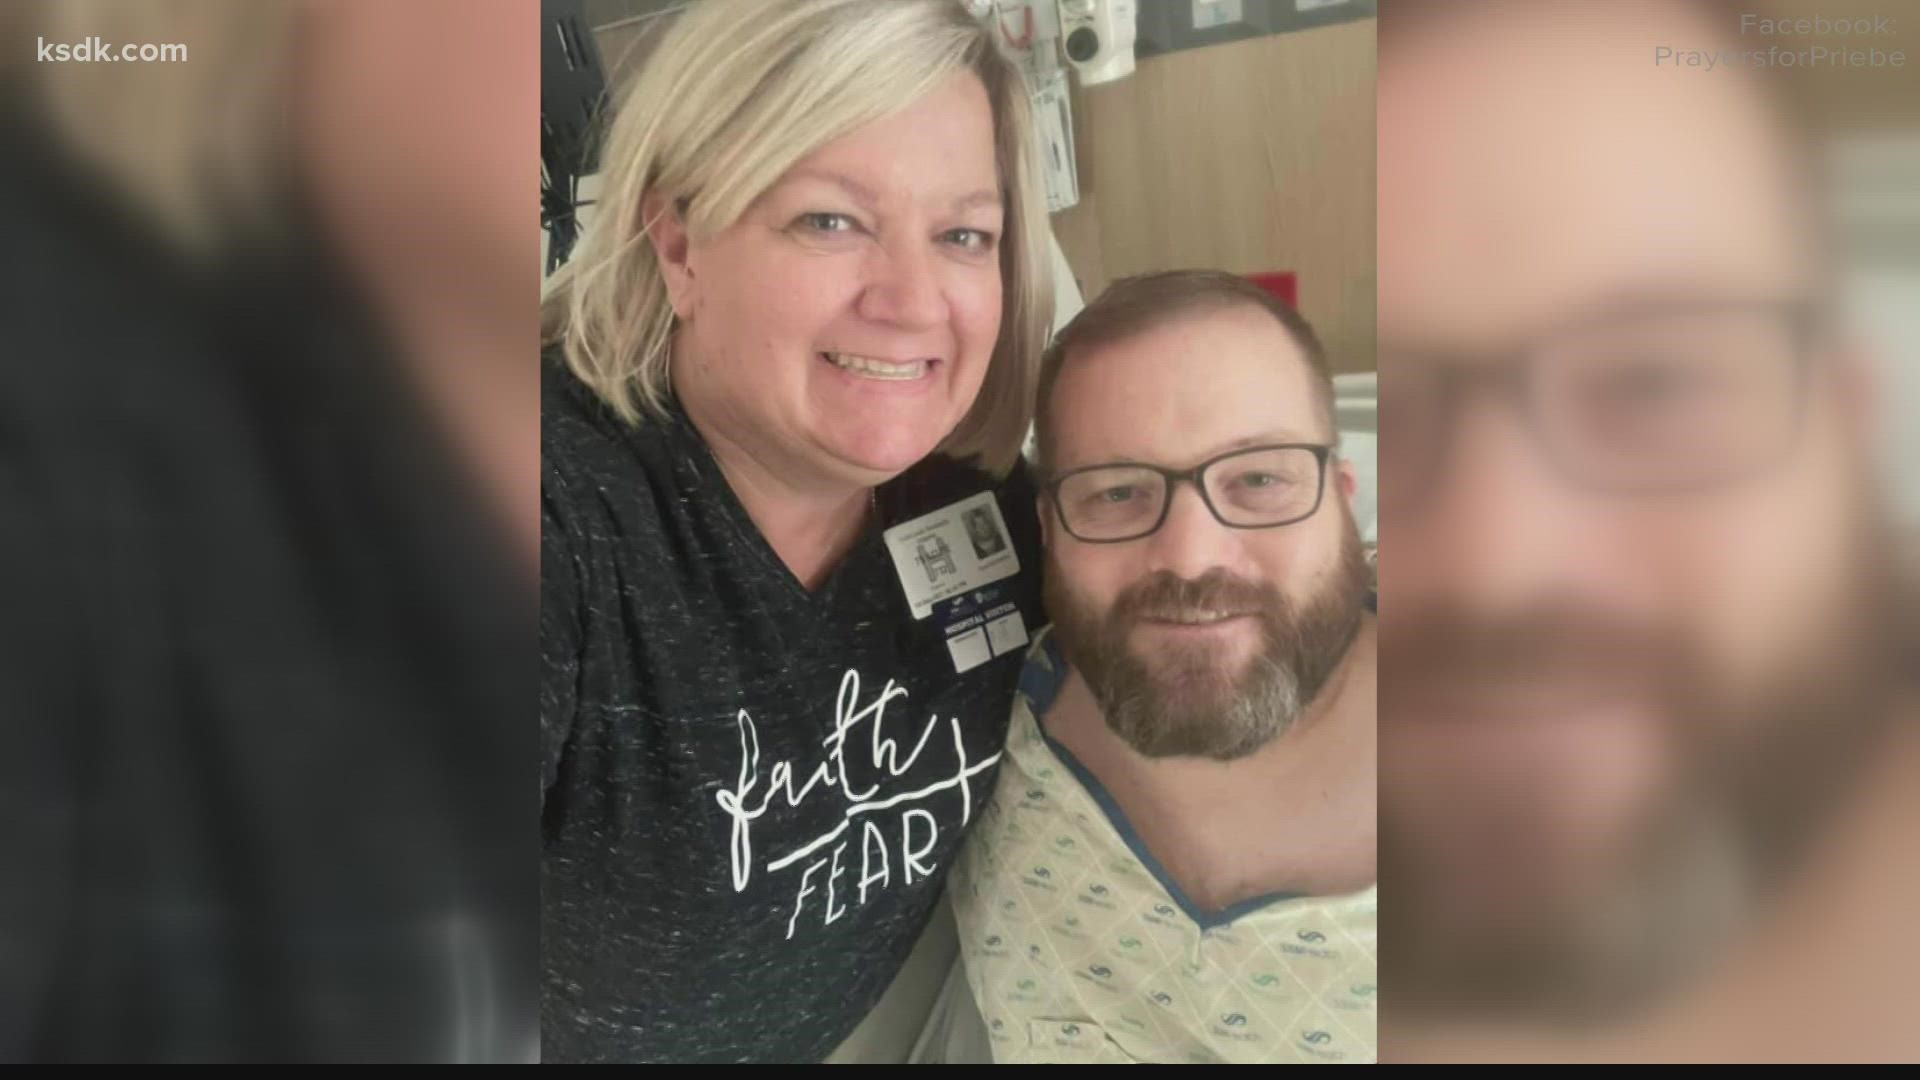 Springfield Officer Mark Priebe had a kidney transplant at SLU and his donor was 22-year-old Independence Officer Blaize Madrid-Evans who was killed on duty.